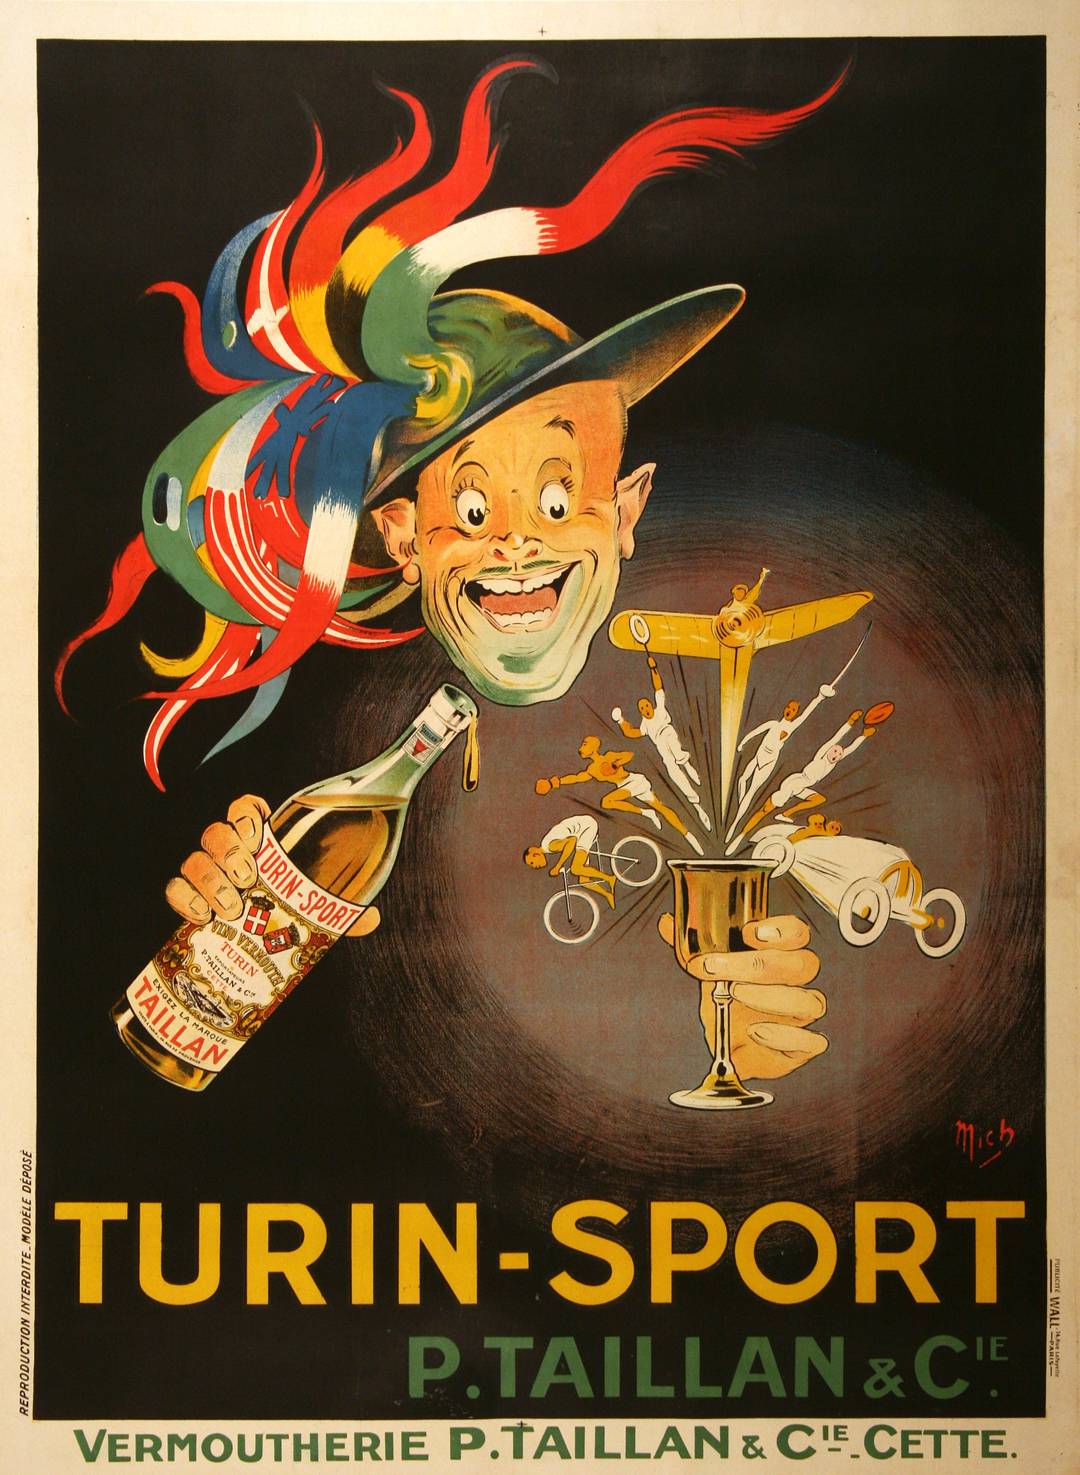 Turin Sport French Original Vintage Liquor Poster c1930 by Mich